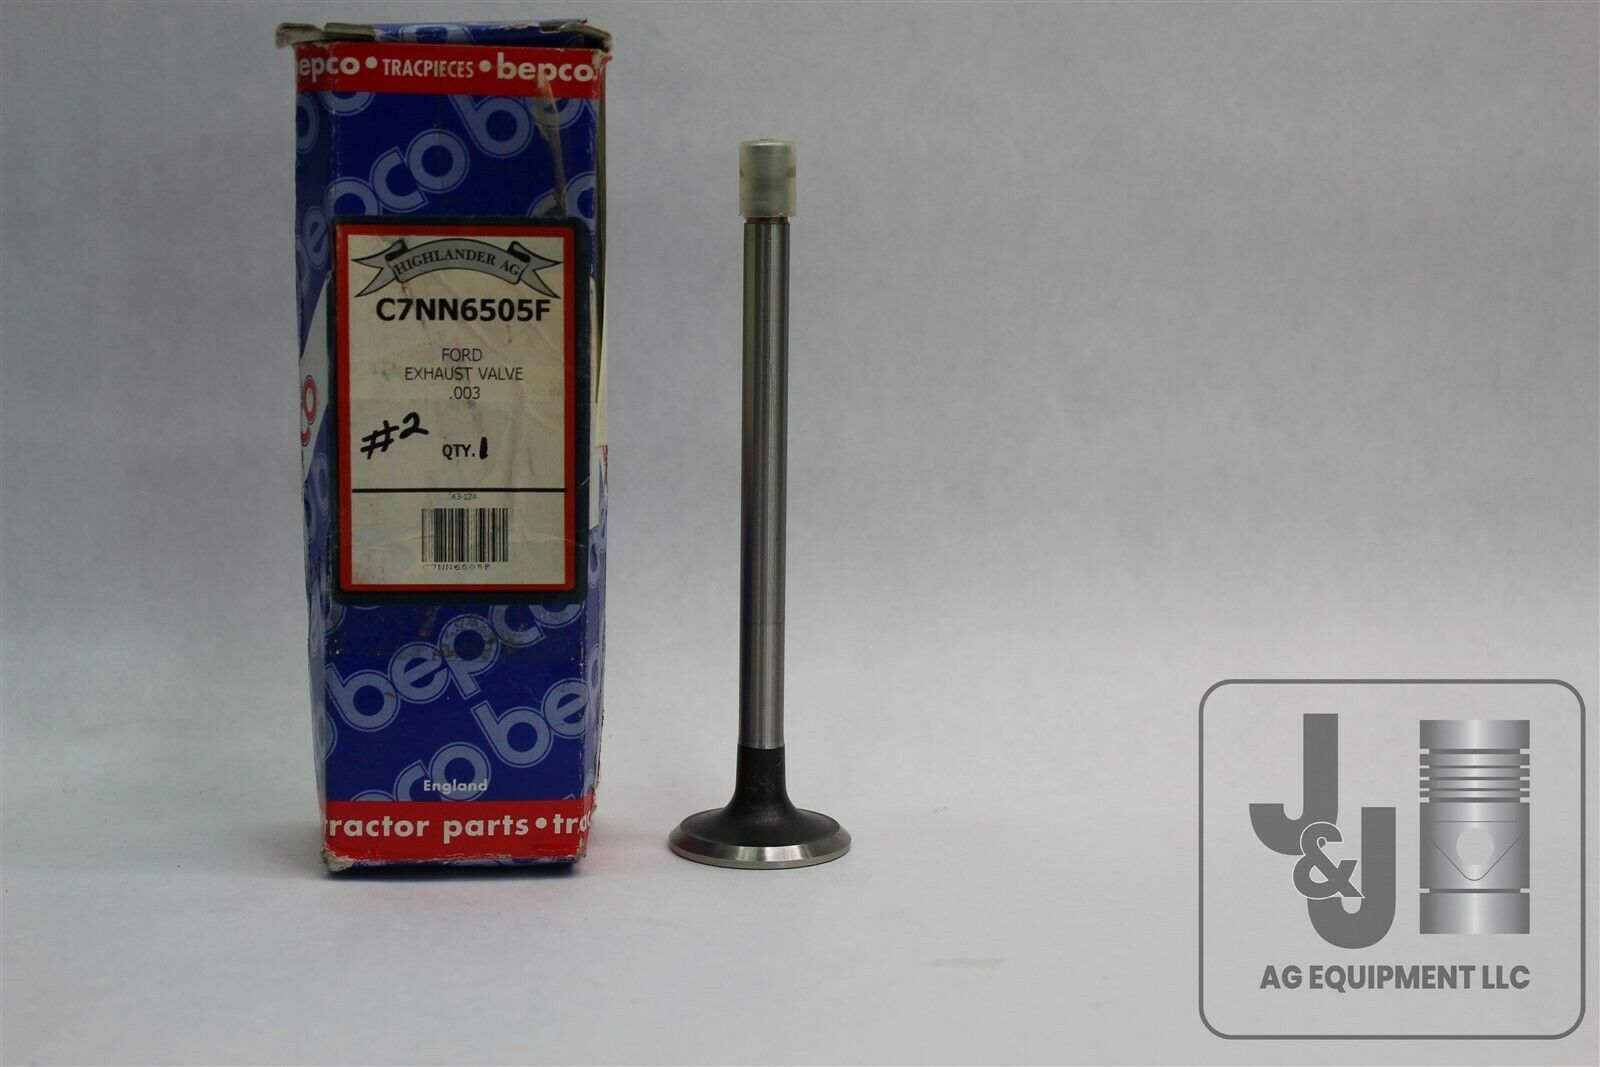 BEPCO #2 C7NN6505F EXHAUST VALVE .003 FITS FORD 4000 4100 4140 4190